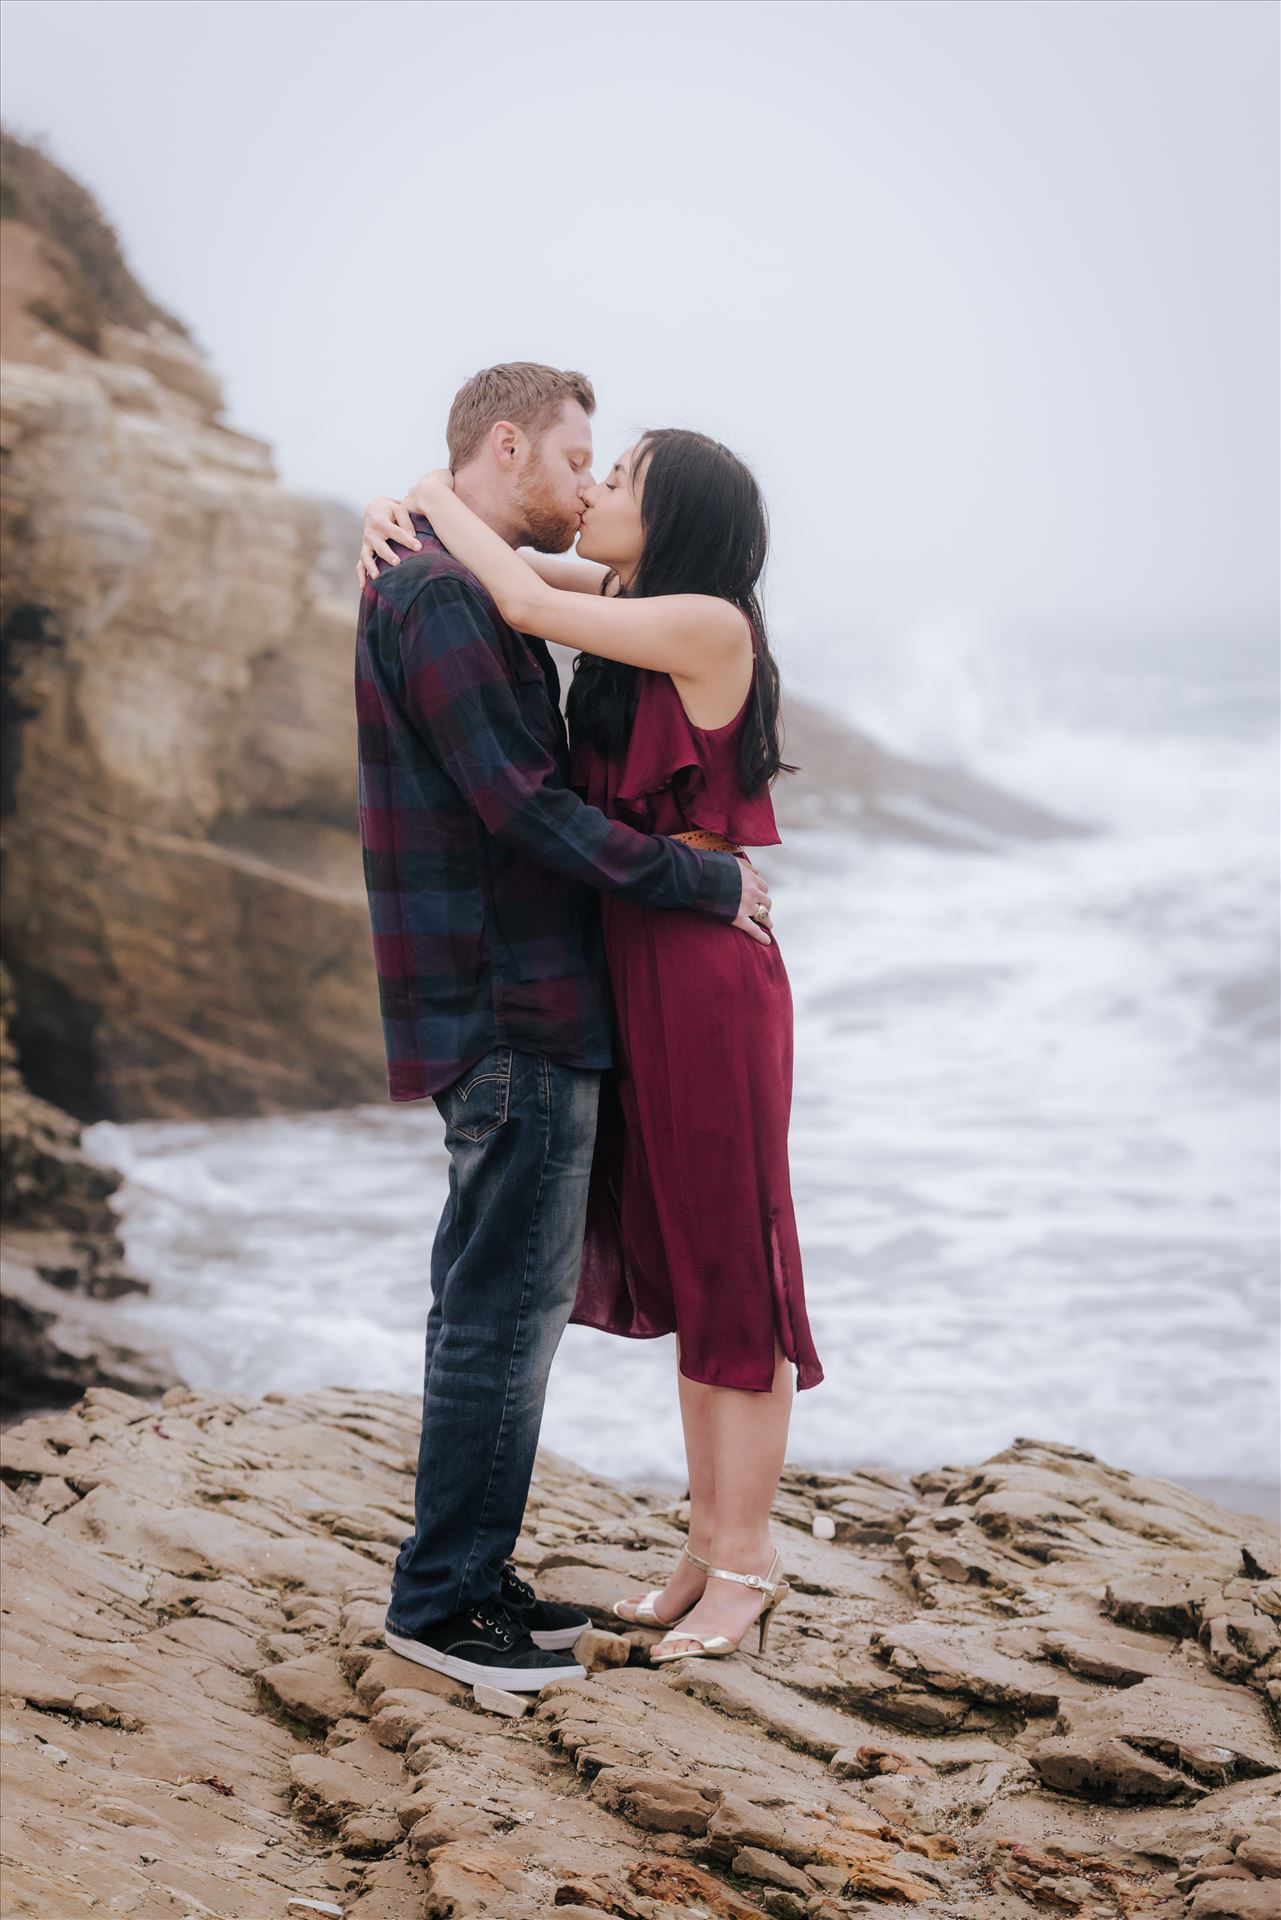 Carmen and Josh 12 - Montana de Oro Spooners Cove Engagement Photography Los Osos California.  Kiss on the nose by Sarah Williams